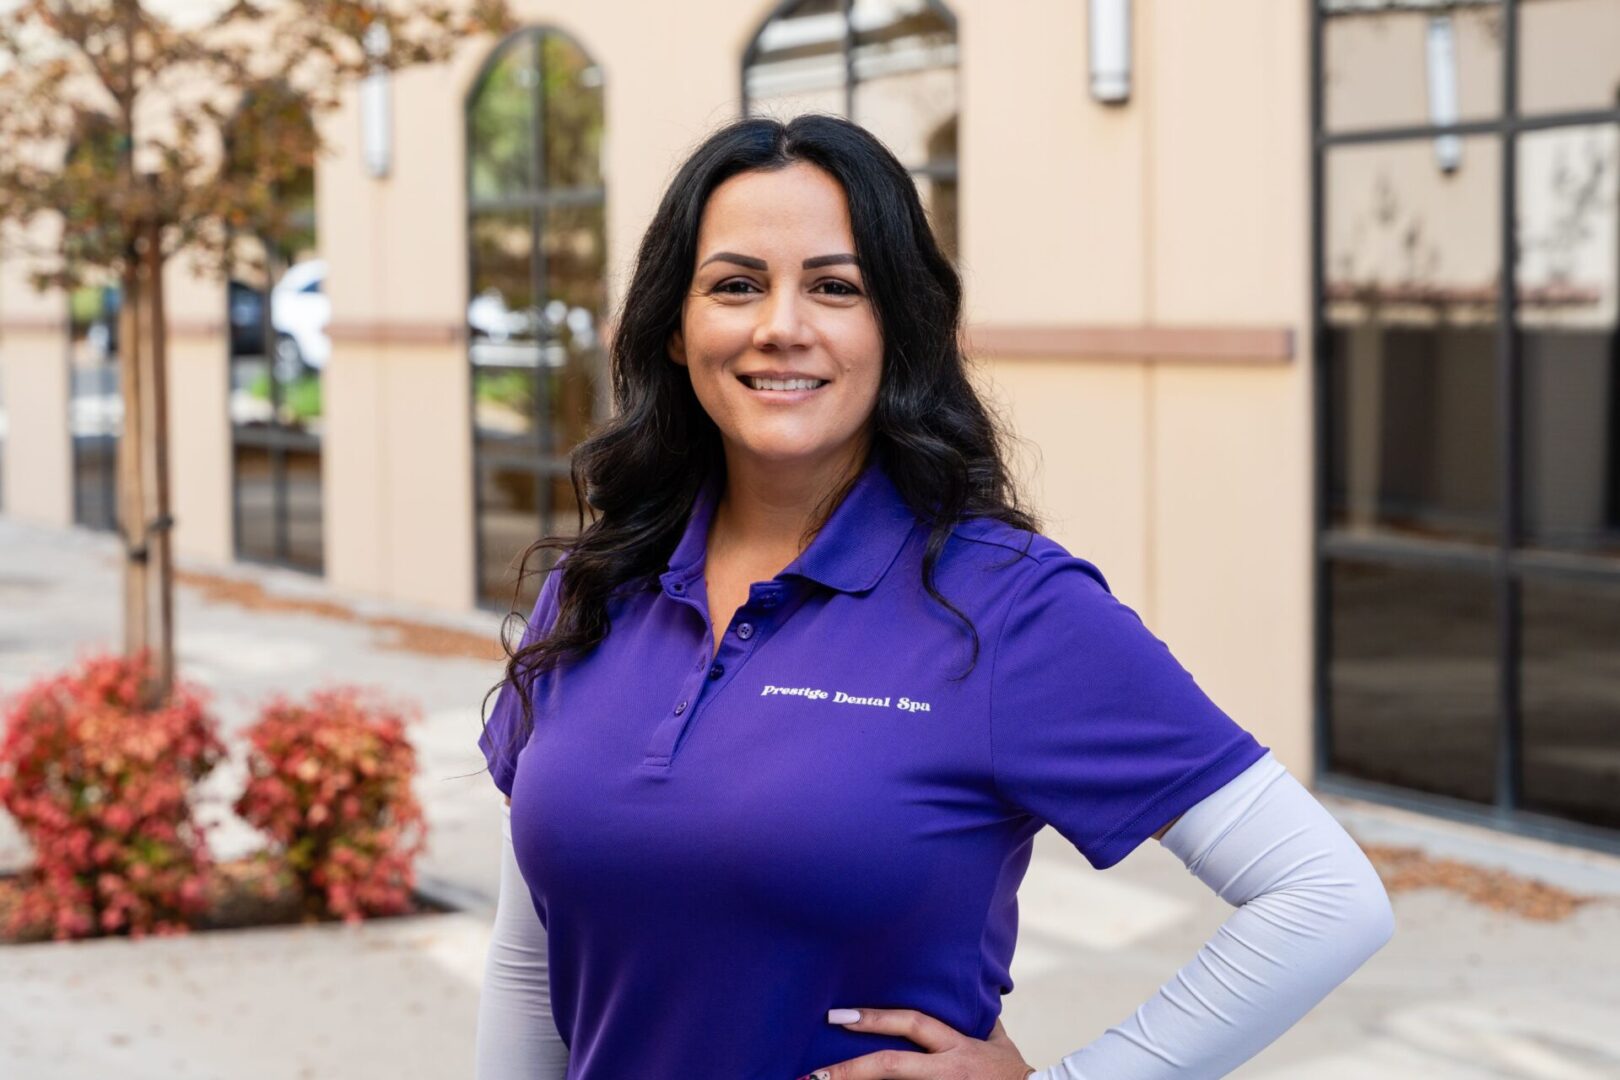 A woman in purple shirt standing next to building.